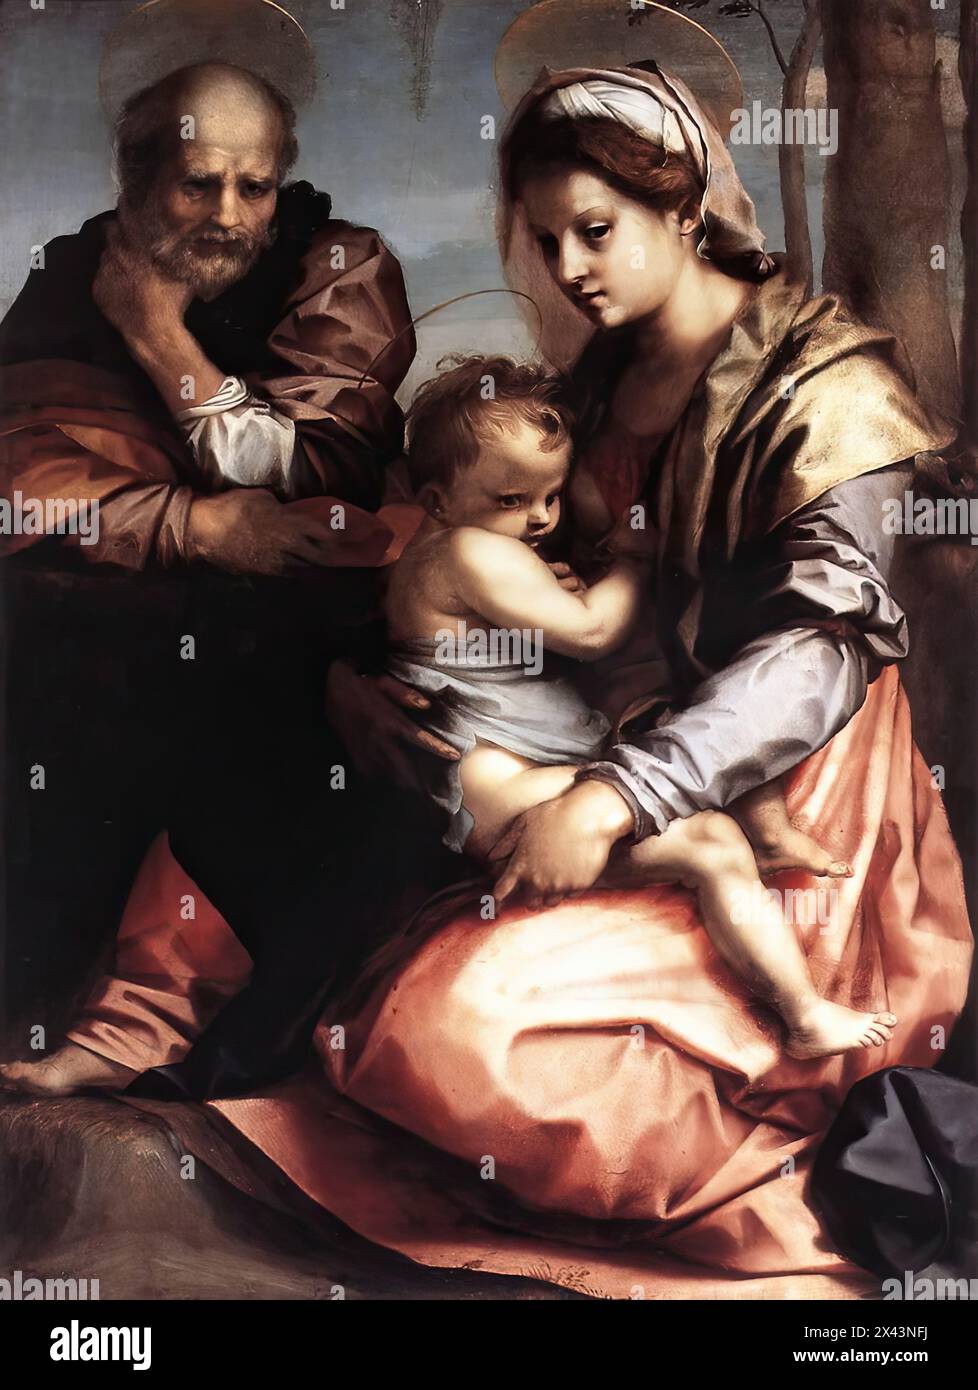 ANDREA DEL SARTO (b. 1486, Firenze, d. 1530, Firenze)  Holy Family (Barberini) c. 1528 Oil on panel, 140 x 104 cm Galleria Nazionale d'Arte Antica, Rome  In his biography of Andrea del Sarto, Vasari mentions this painting right after a panel of the same subject painted for Zanobi Bracci. The latter picture survives: given to Cardinal Ferdinando de Medici it is now in the Galleria Palatina at the Palazzo Pitti in Florence. The picture now in Rome, painted for the same Zanobi, was originally installed in the chapel of the Villa di Rovezzano.  Numerous copies of this celebrated work exist. Art hi Stock Photo